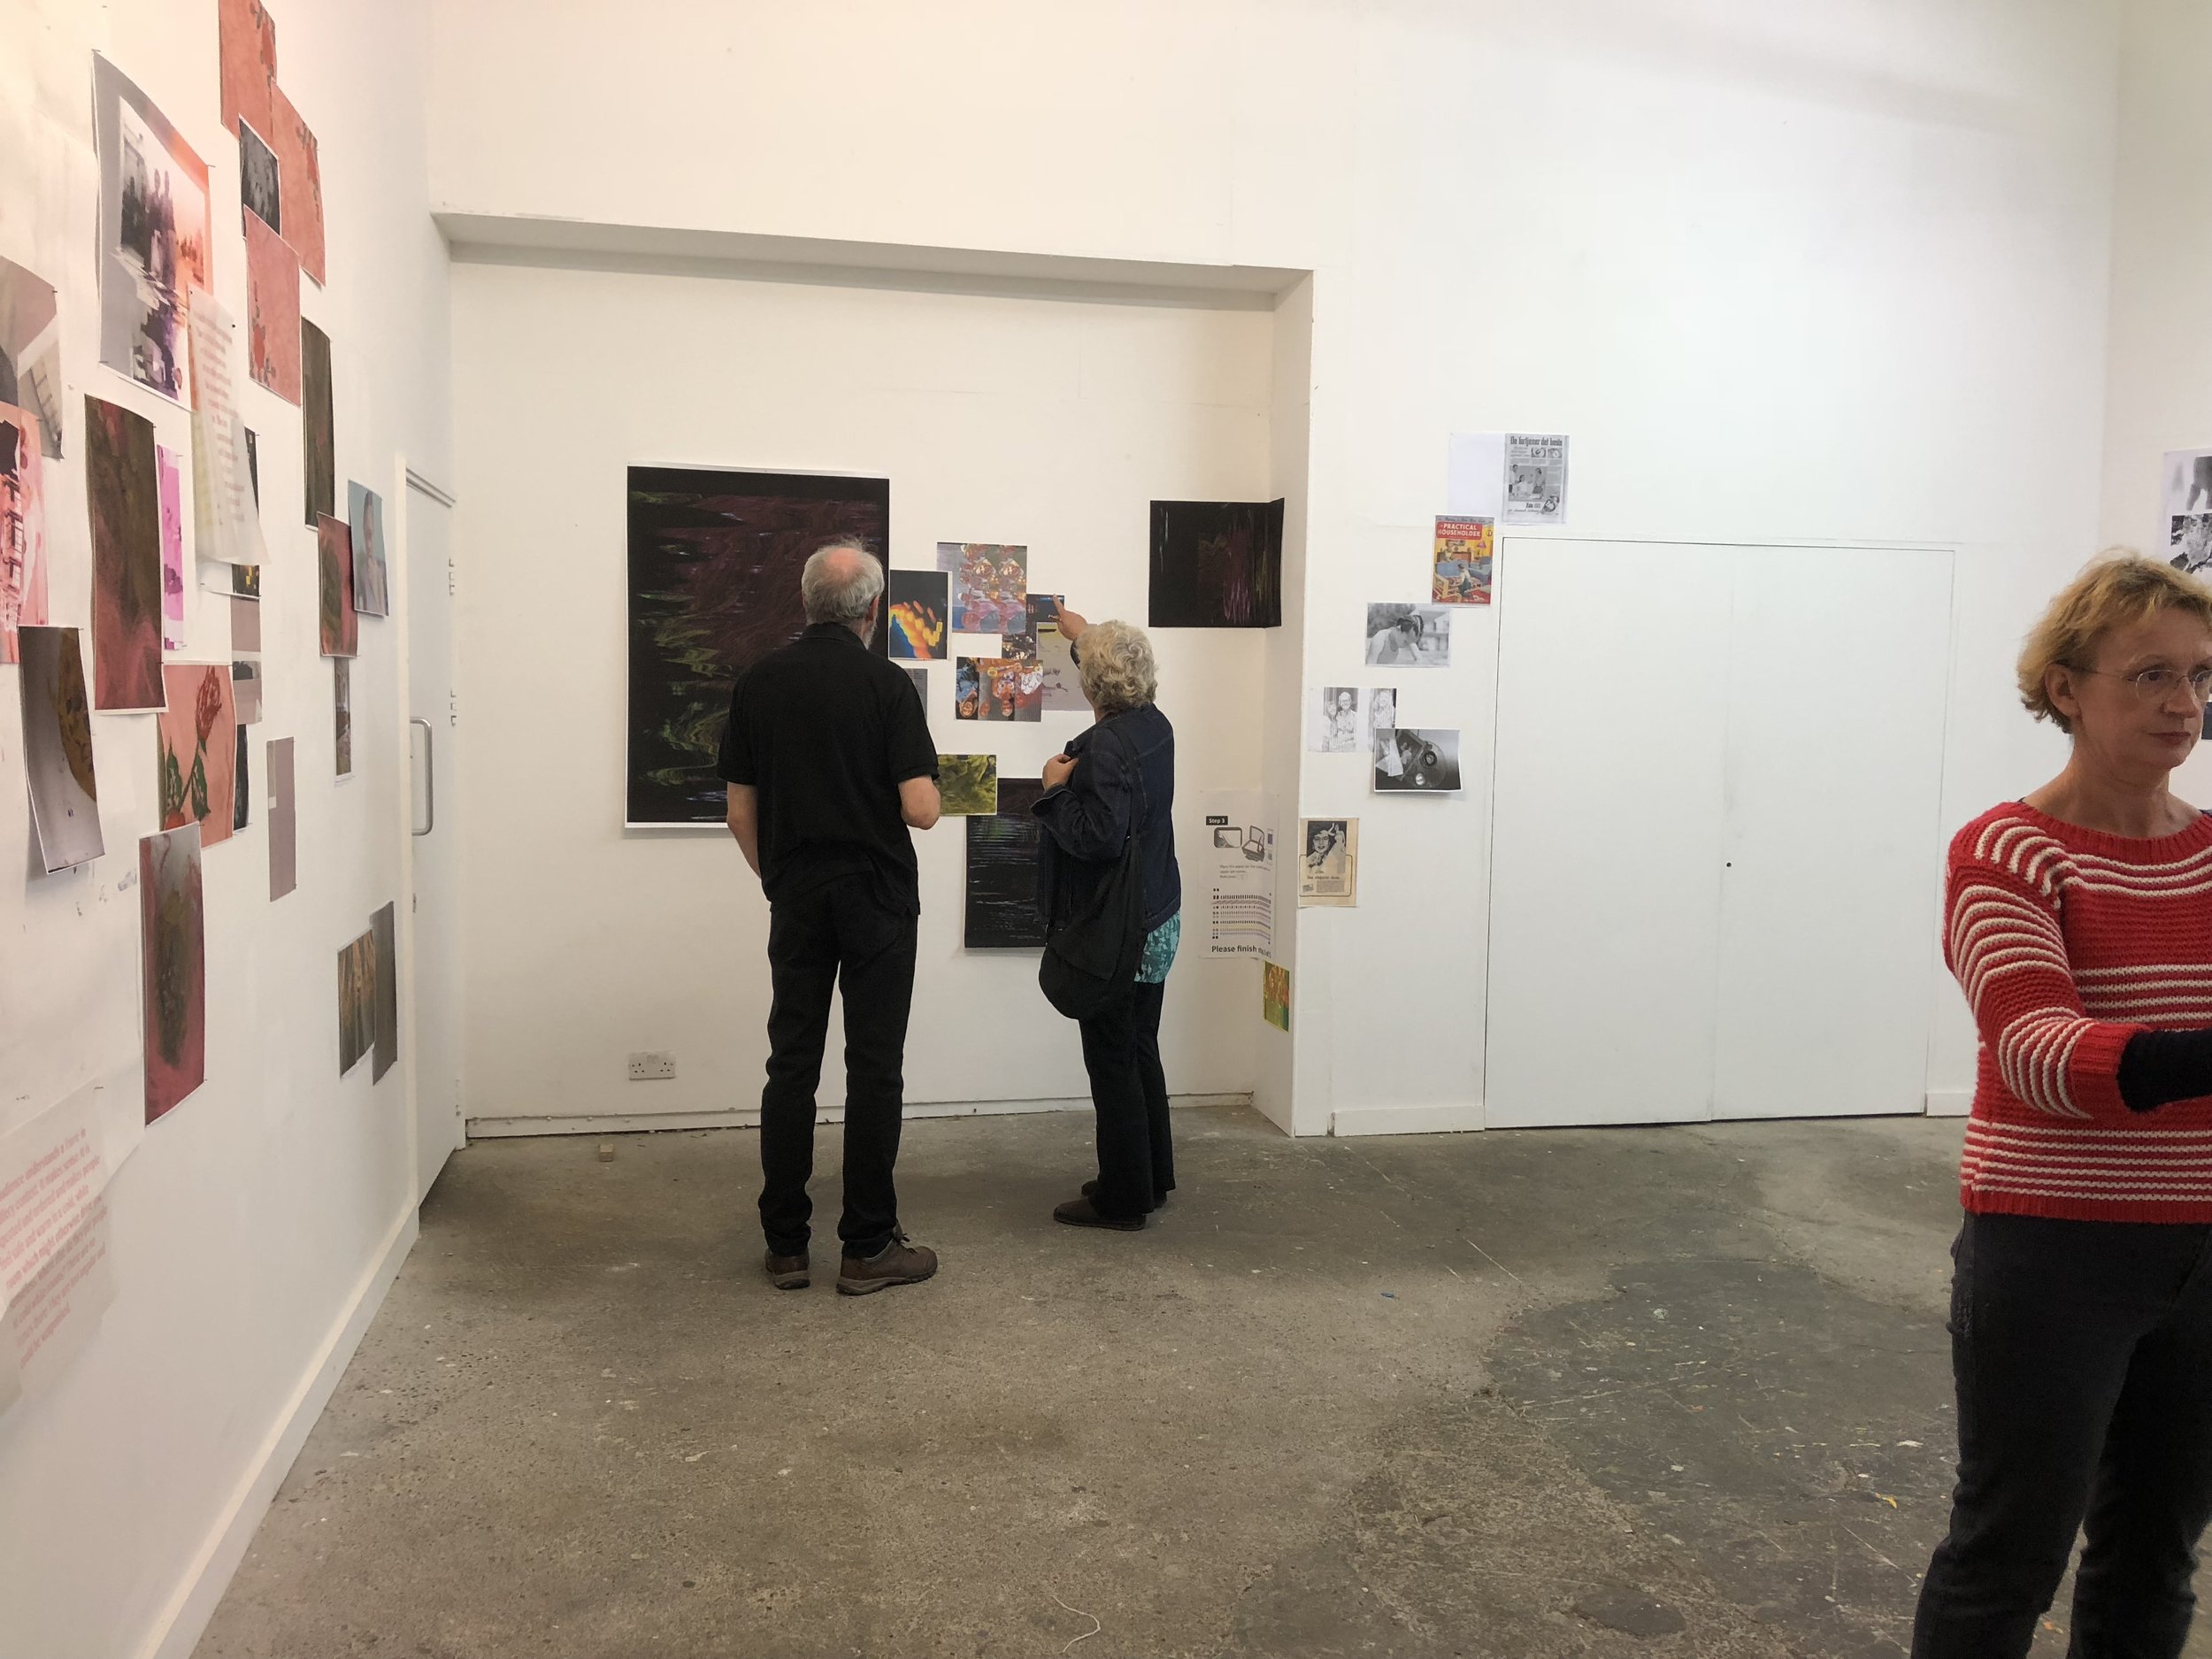  TOMA group show ‘TONER’ at  LIMBO in Margate , showing collaborative/fragmented/copier-themed artworks, 2018. 